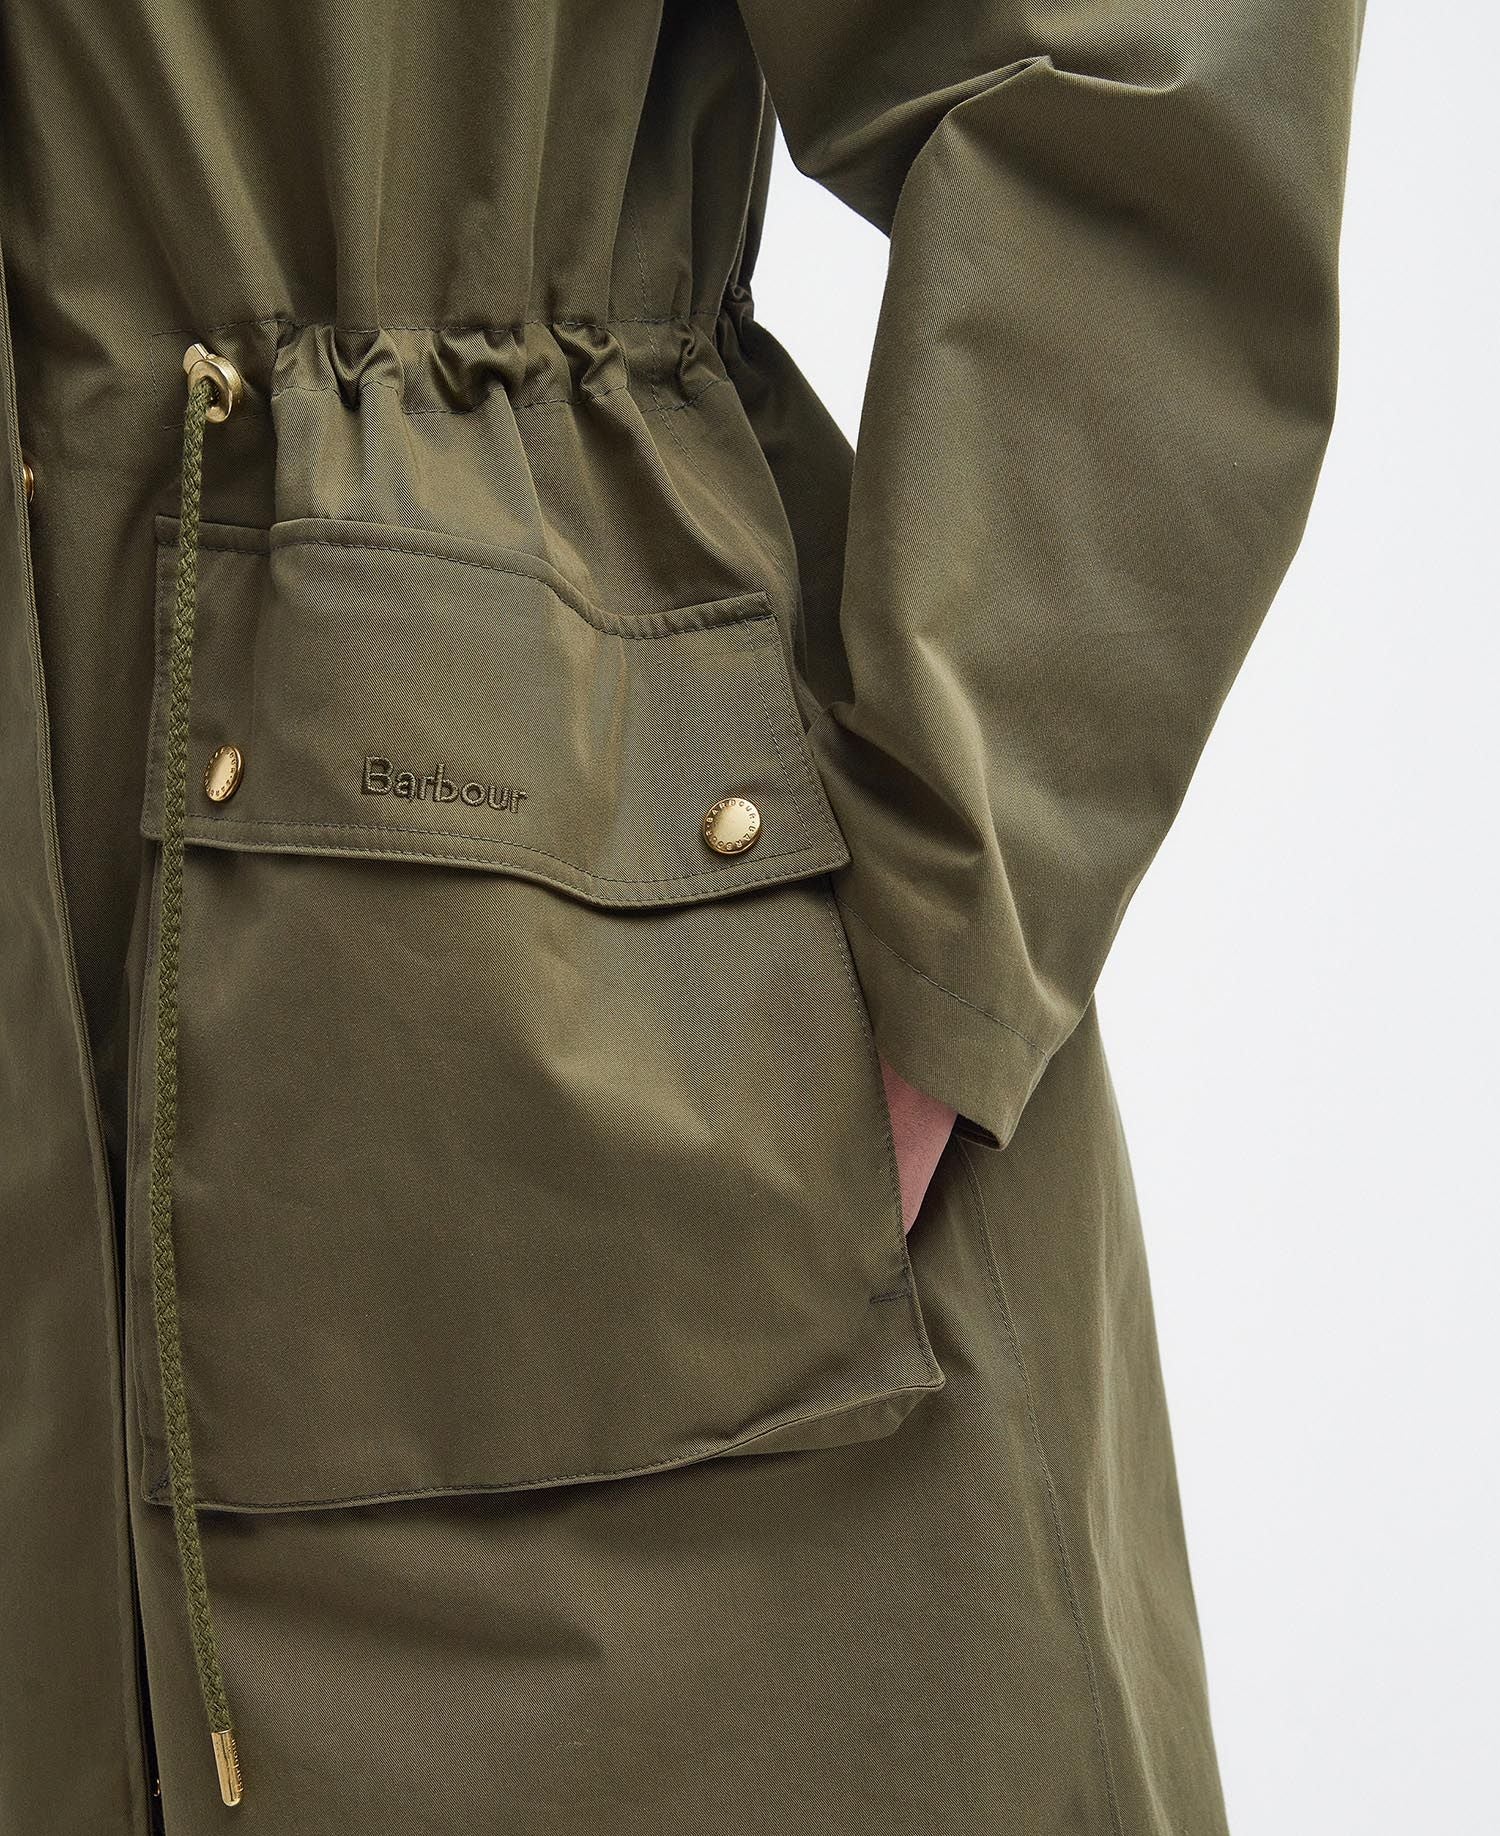 Parka Barbour Catherine